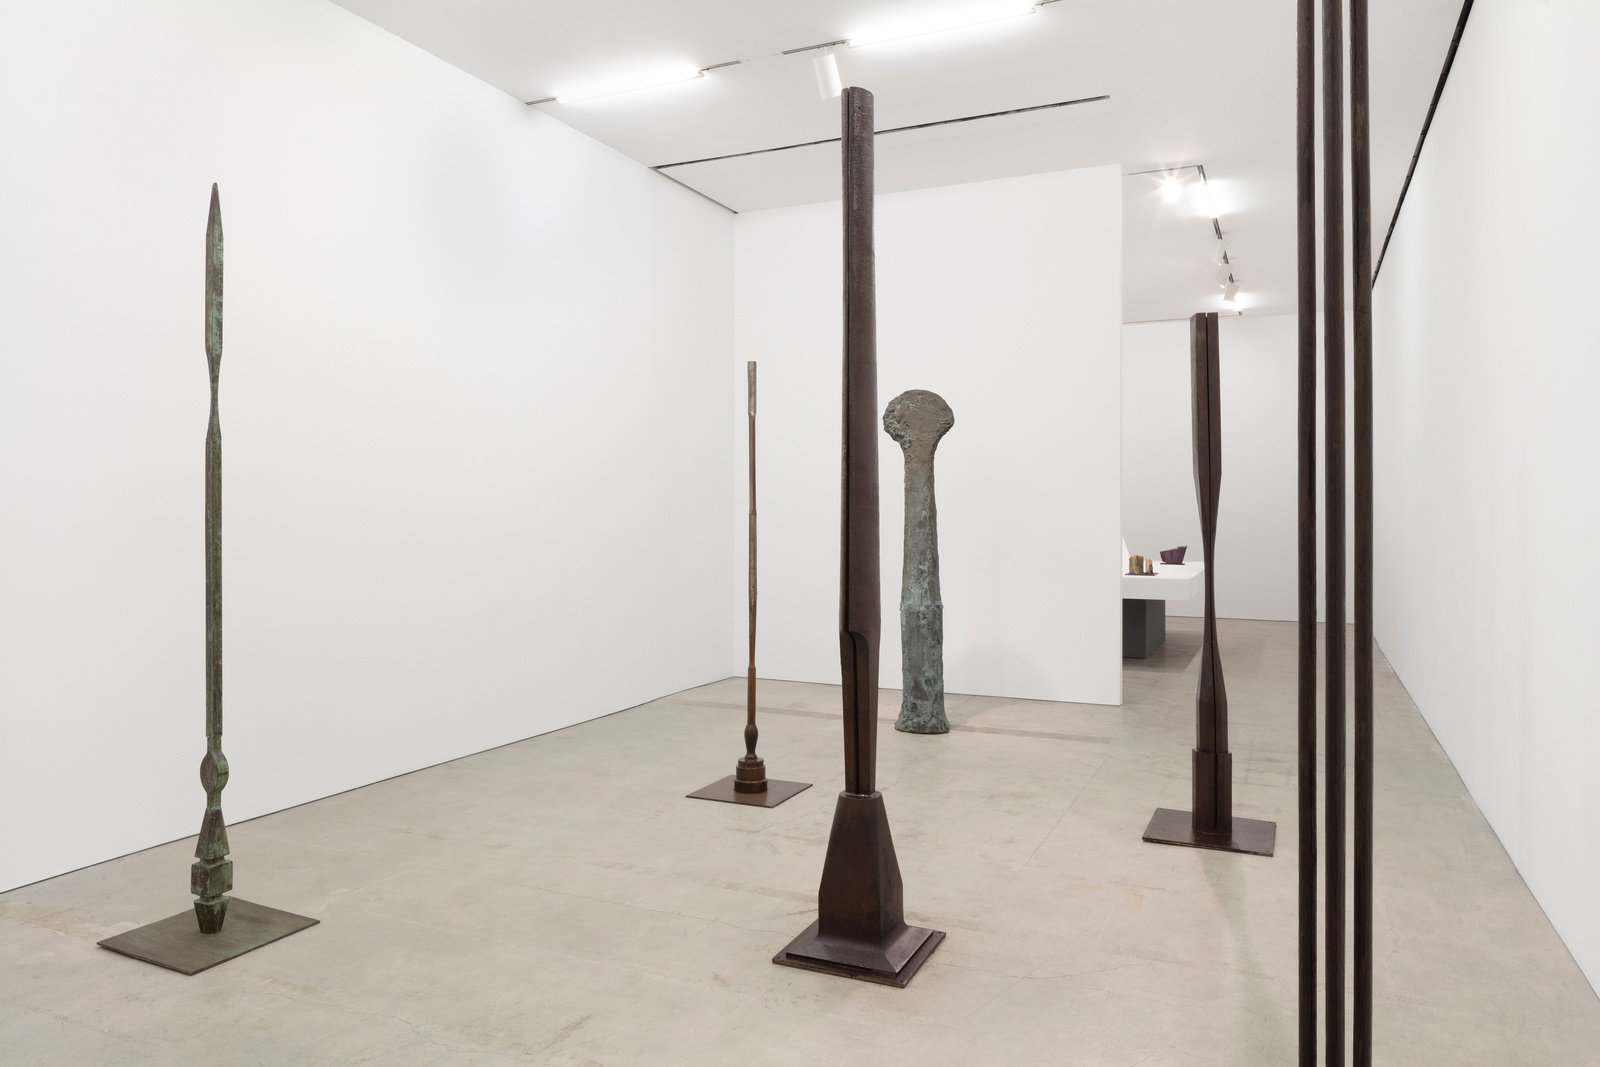 Beverly pepper, selected works 1968 2018, installation view 7 pierre le hors